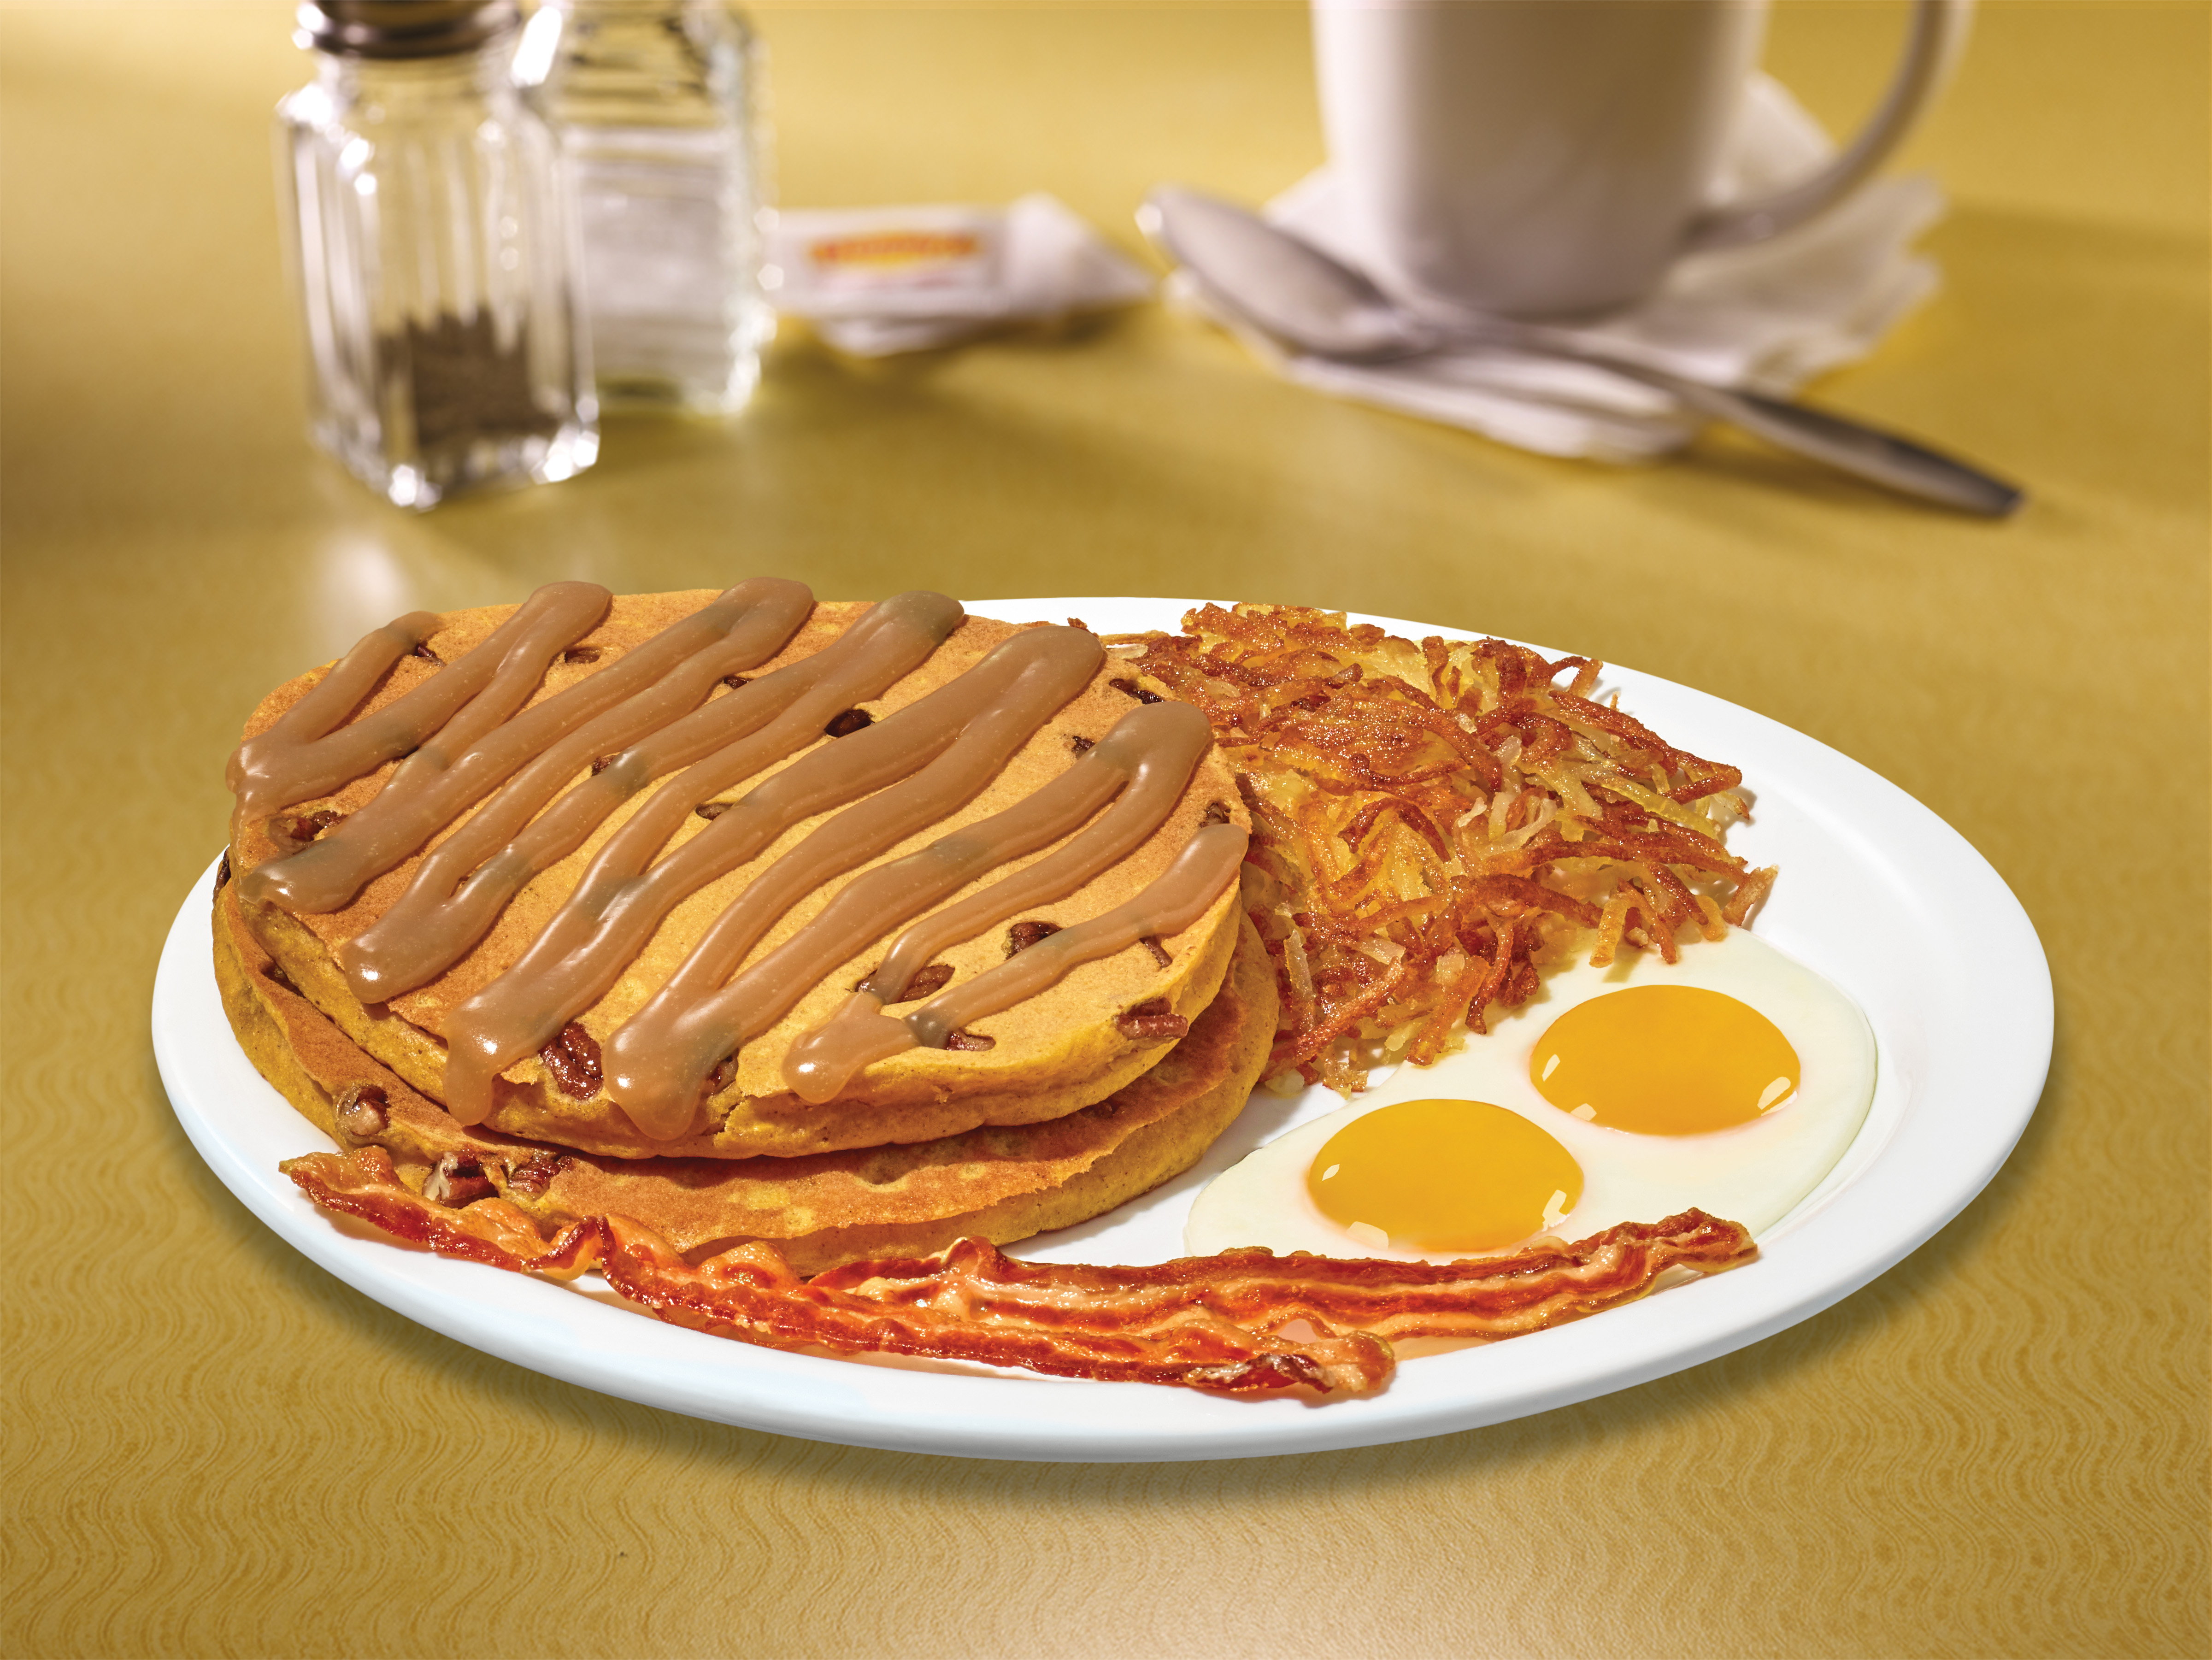 THE DISH: Endless Breakfast? Denny's makes dreams come true, Food